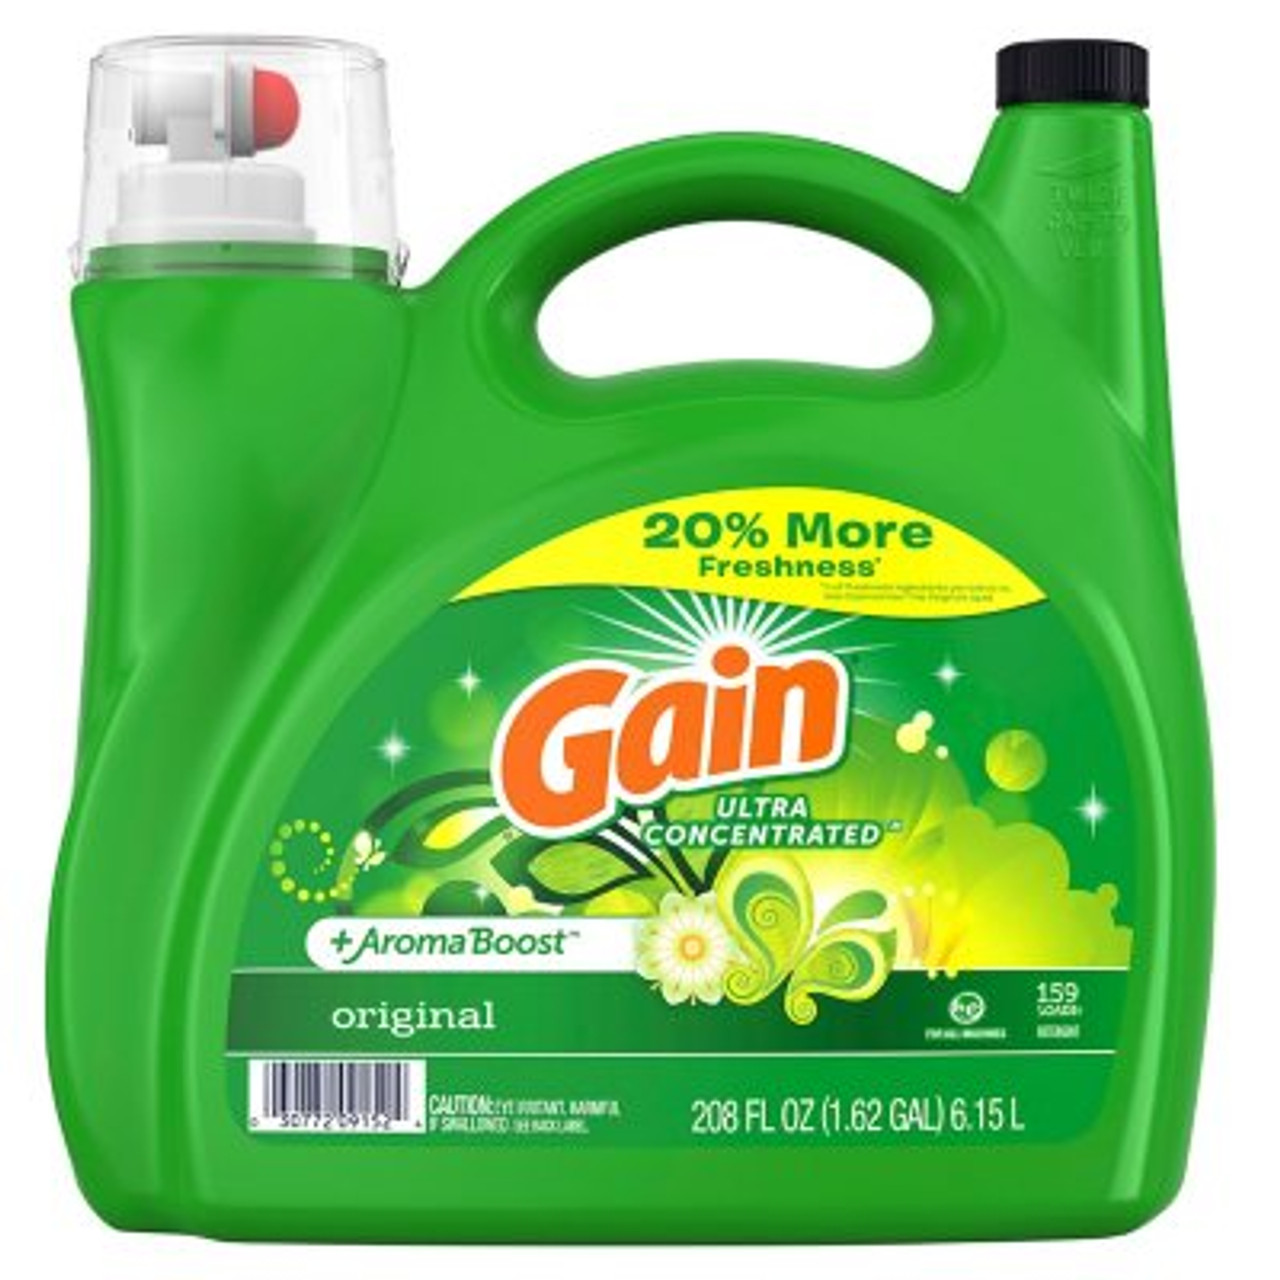 Gain Ultra Concentrated + Aroma Boost Laundry Detergent, Original Scent (208 fl. oz., 159 loads) - [From 88.00 - Choose pk Qty ] - *Ships from Miami